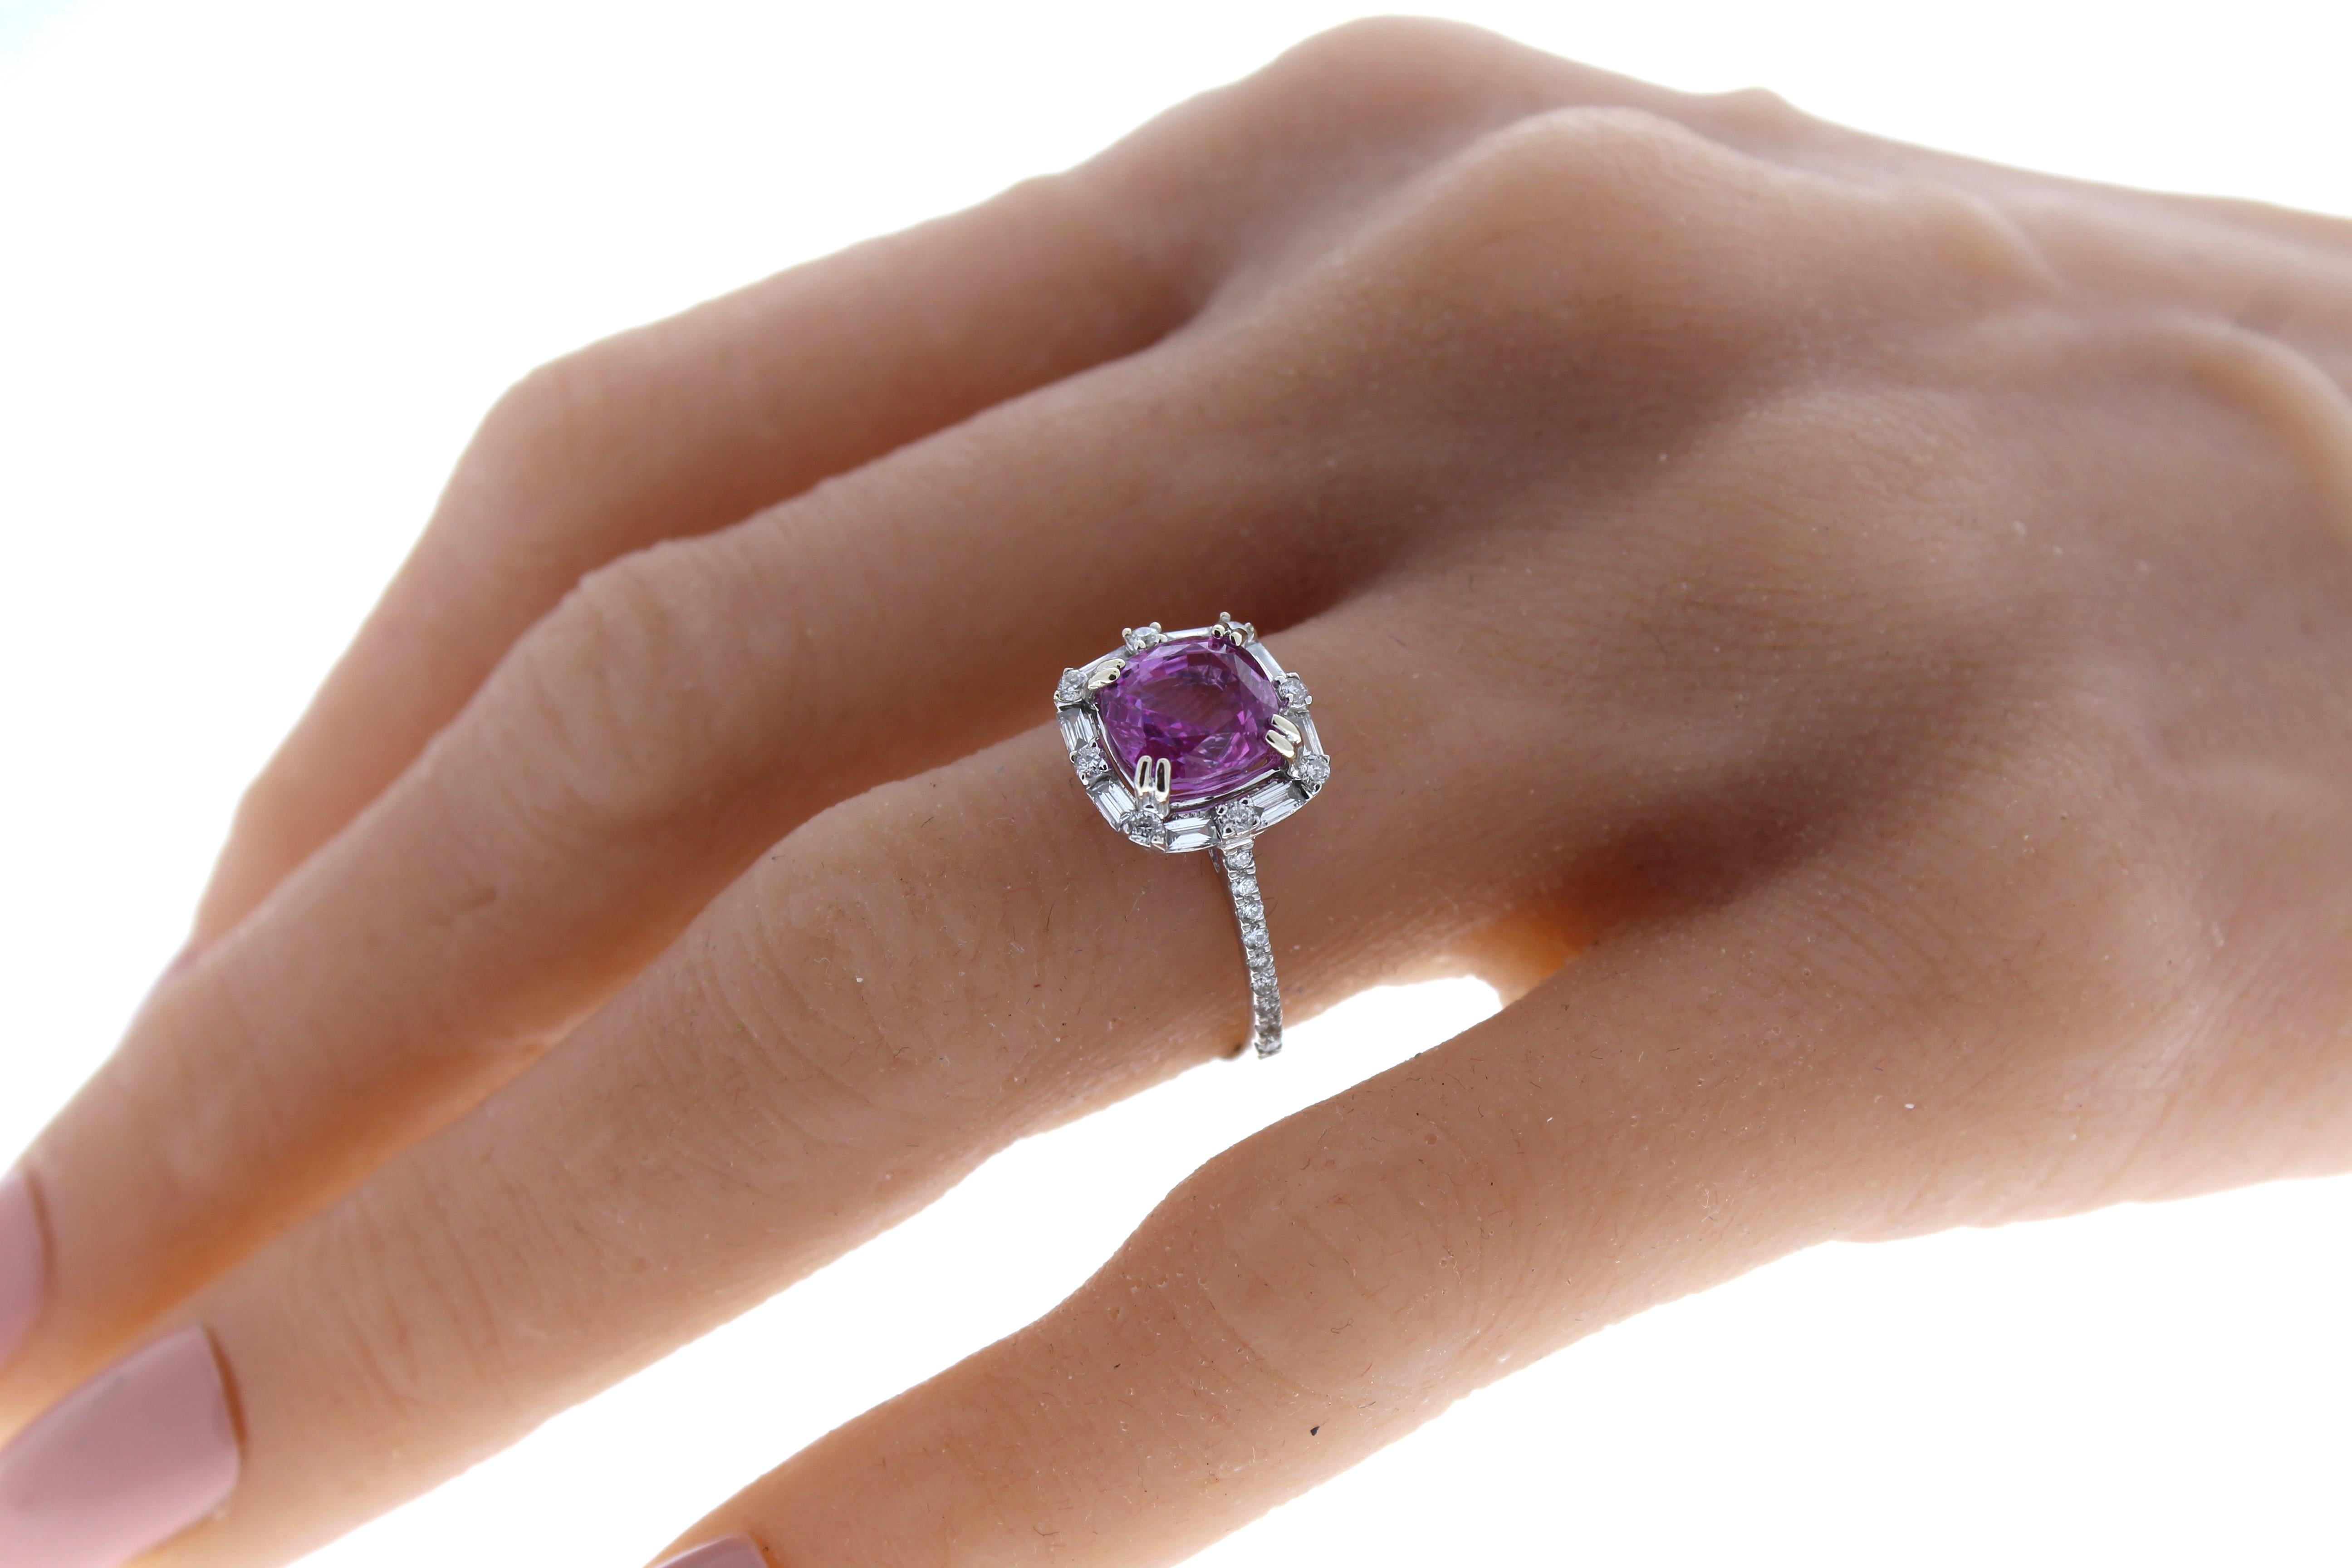 Uncut 2.81 Carat Weight Pink Sapphire & Round Diamond Fashion Ring in 14k White Gold  For Sale